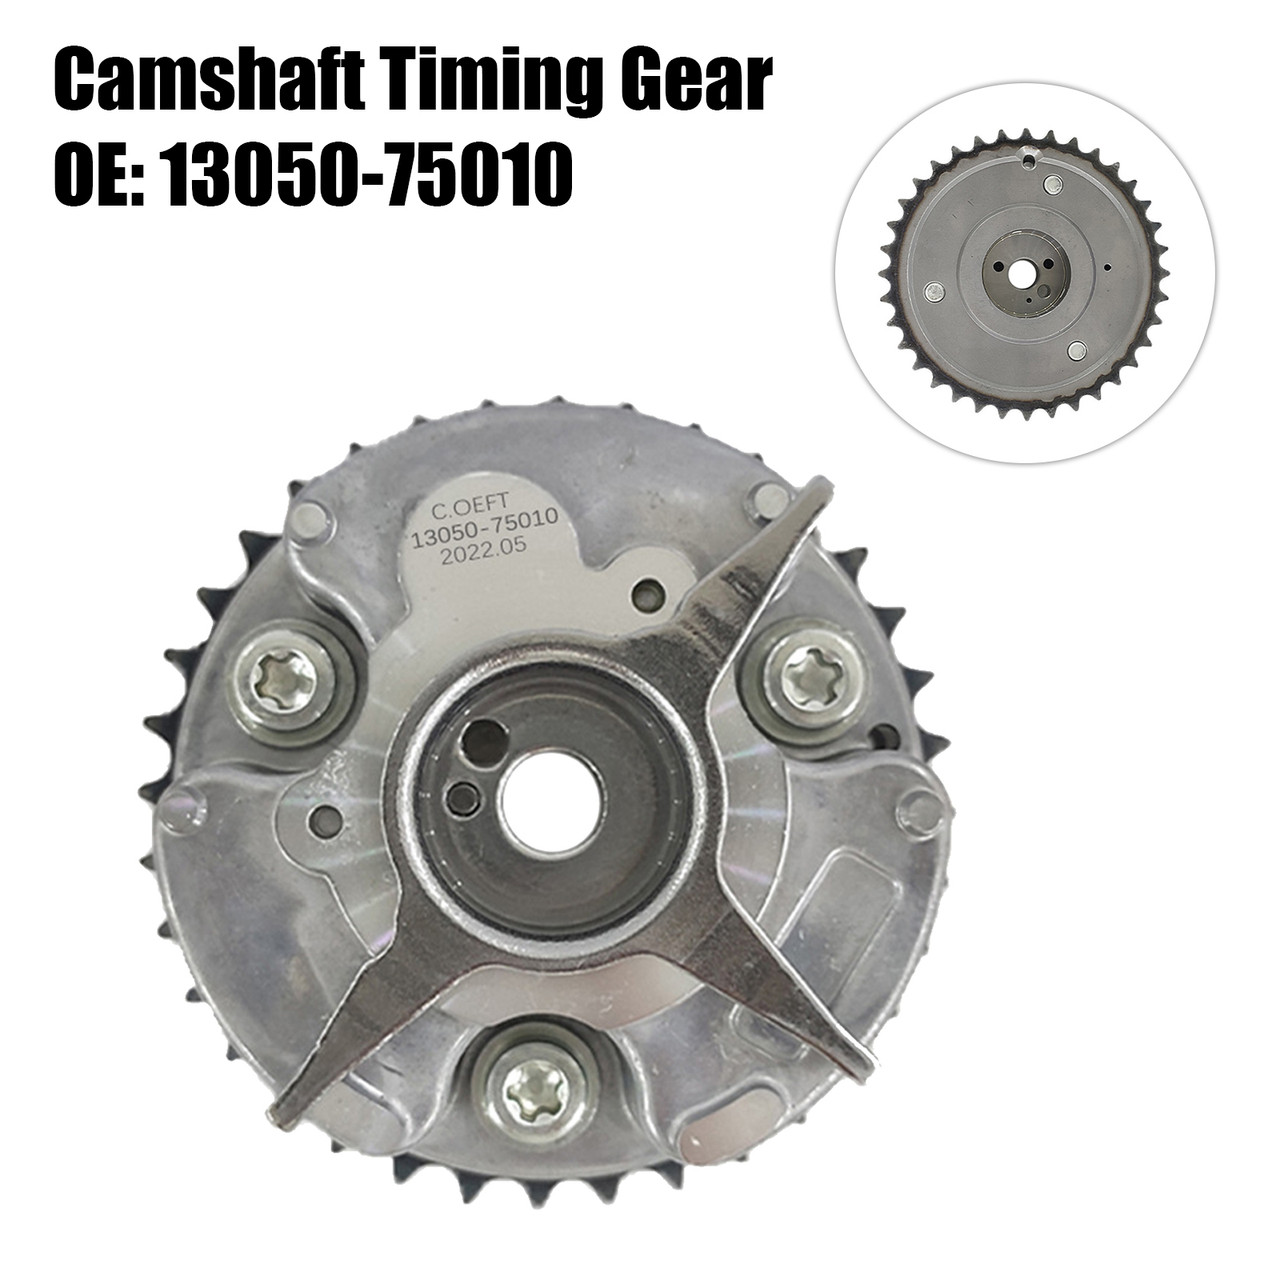 Camshaft Timing Gear 13050-75010 for Toyota Tacoma 05-12 4Runner 2010 2TR 2.7L